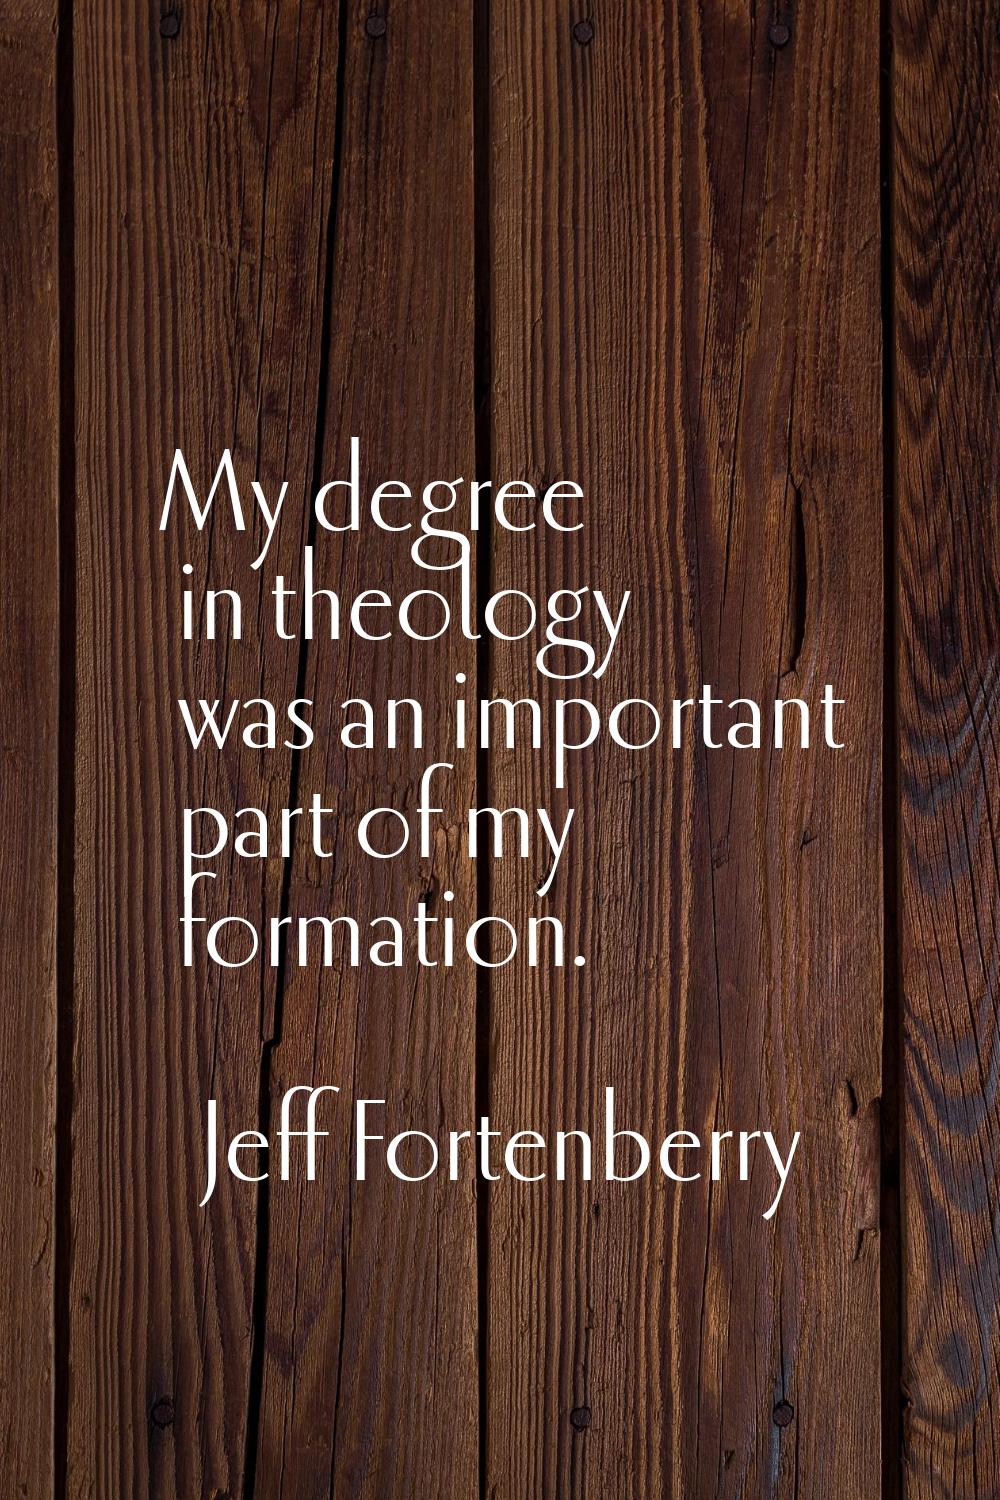 My degree in theology was an important part of my formation.